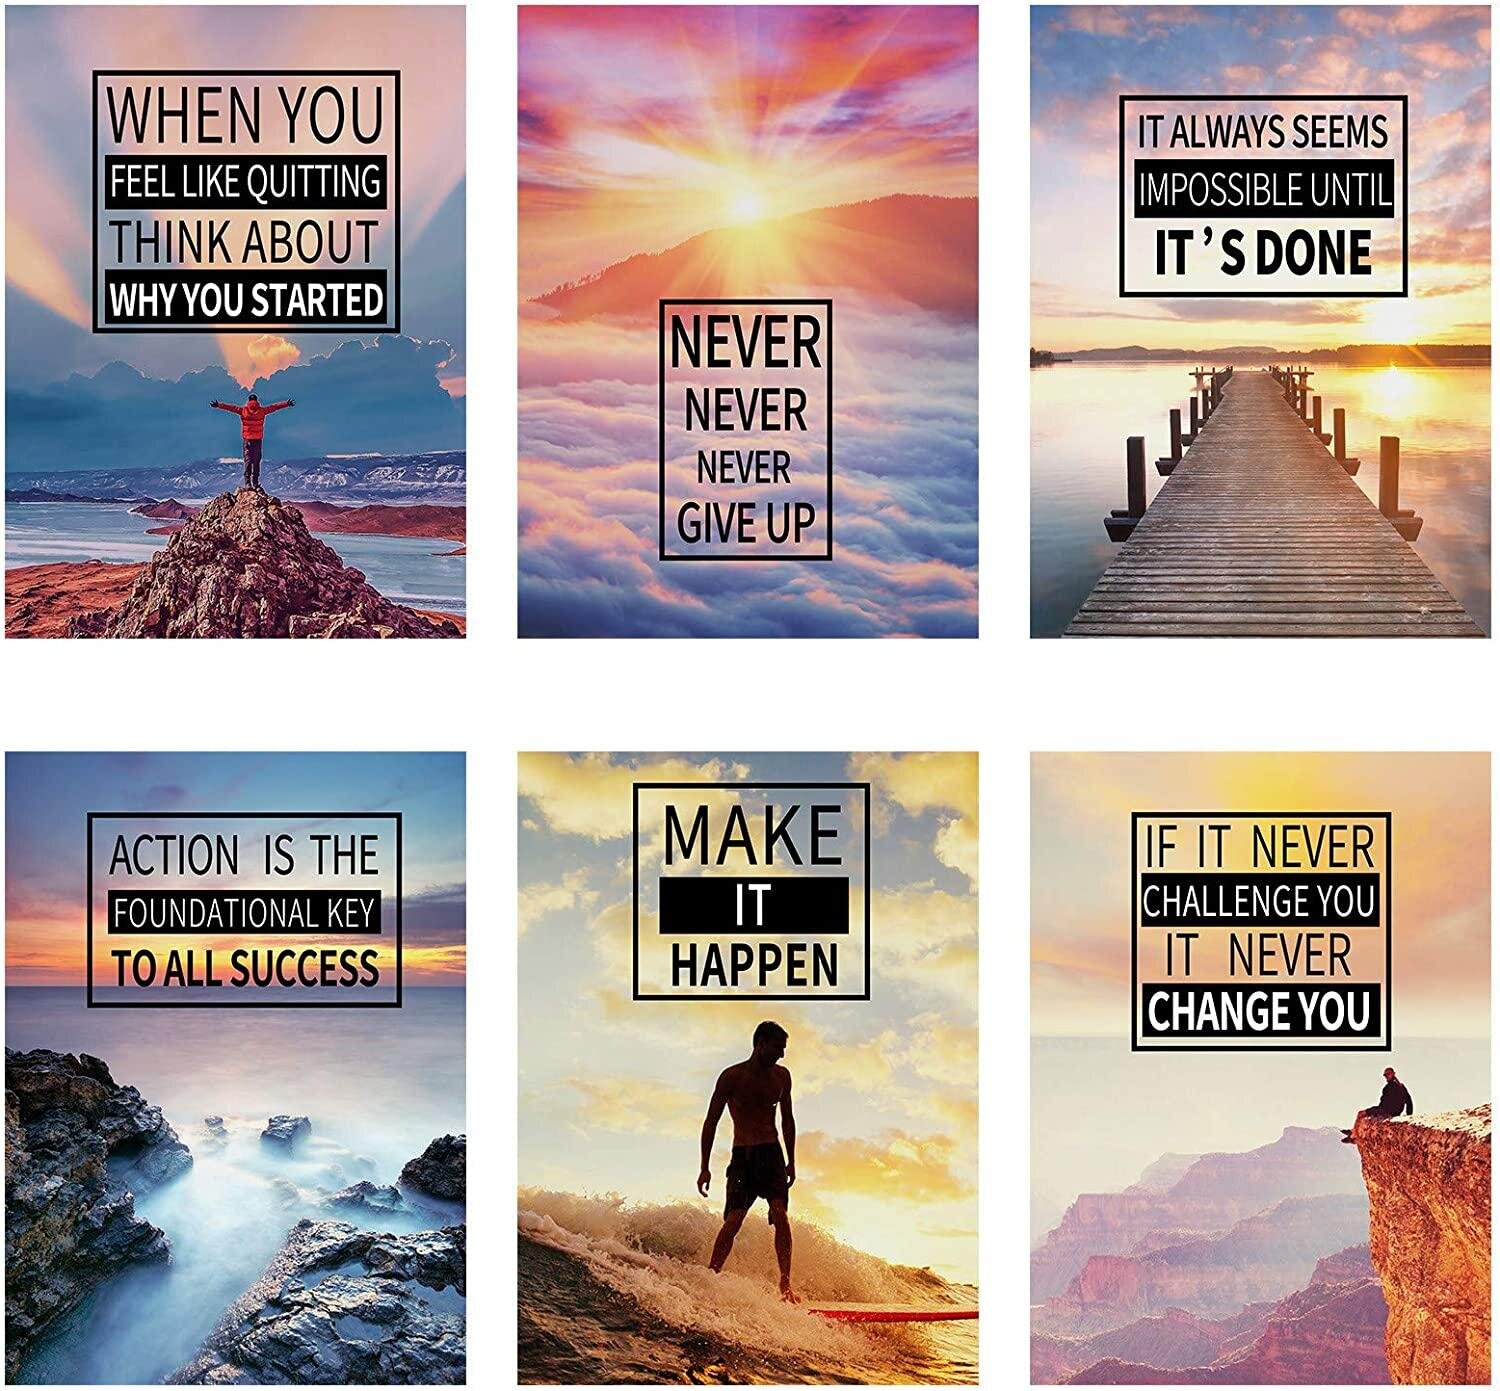 IMPOSSIBLE SPACE MOTIVATIONAL QUOTE SAYING INSPIRATIONAL ARTWORK PRINT POSTER 